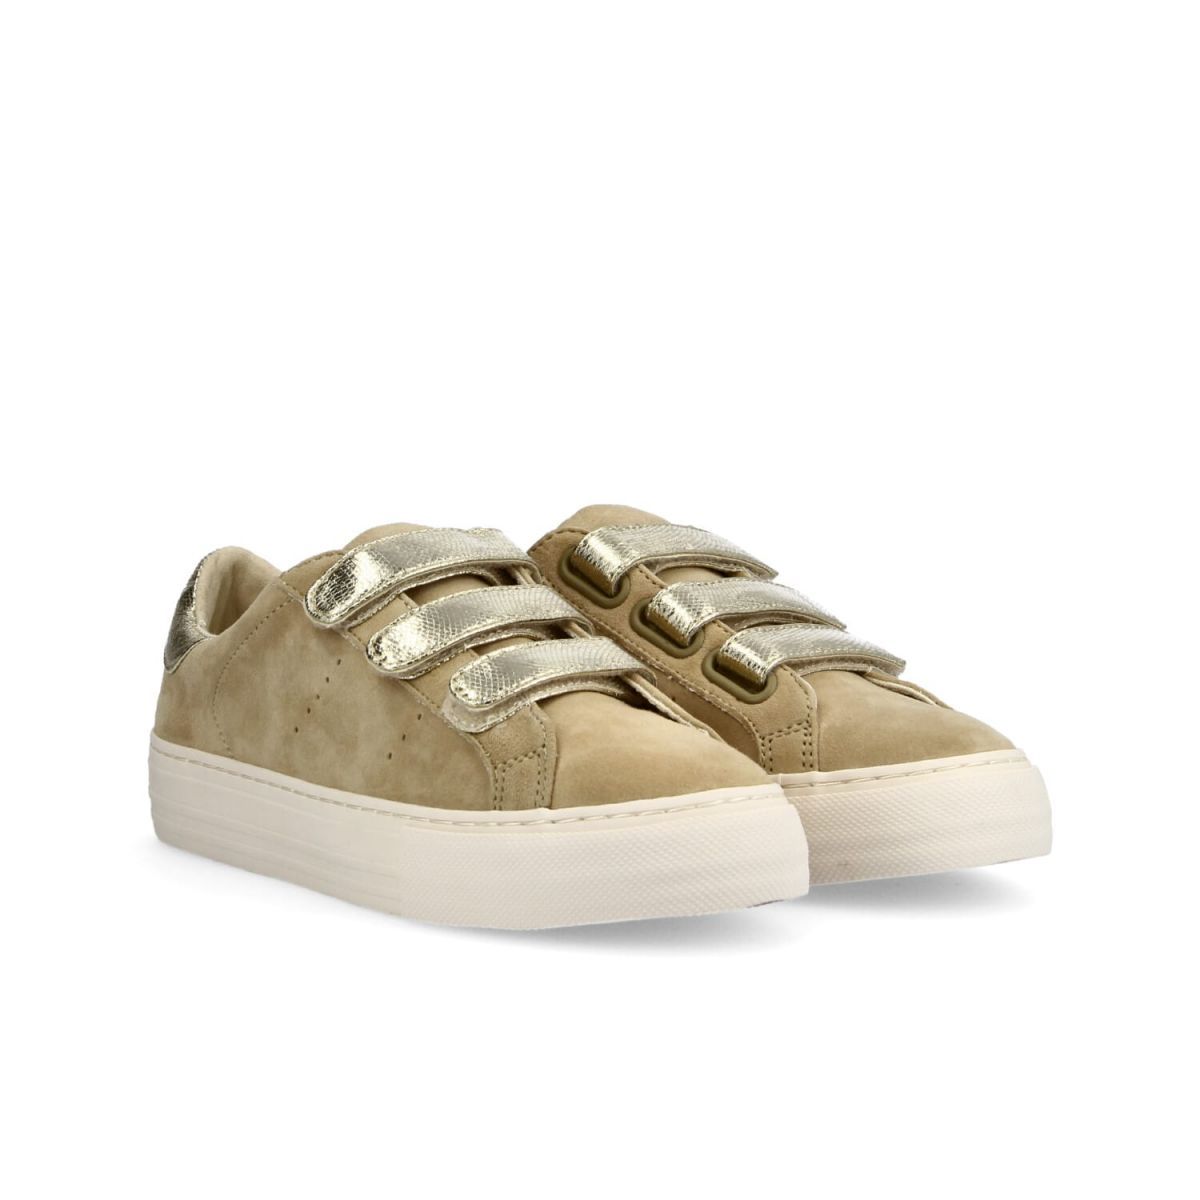 Arcade Straps Suede Beige Sneakers KNGDWI0418 - 2